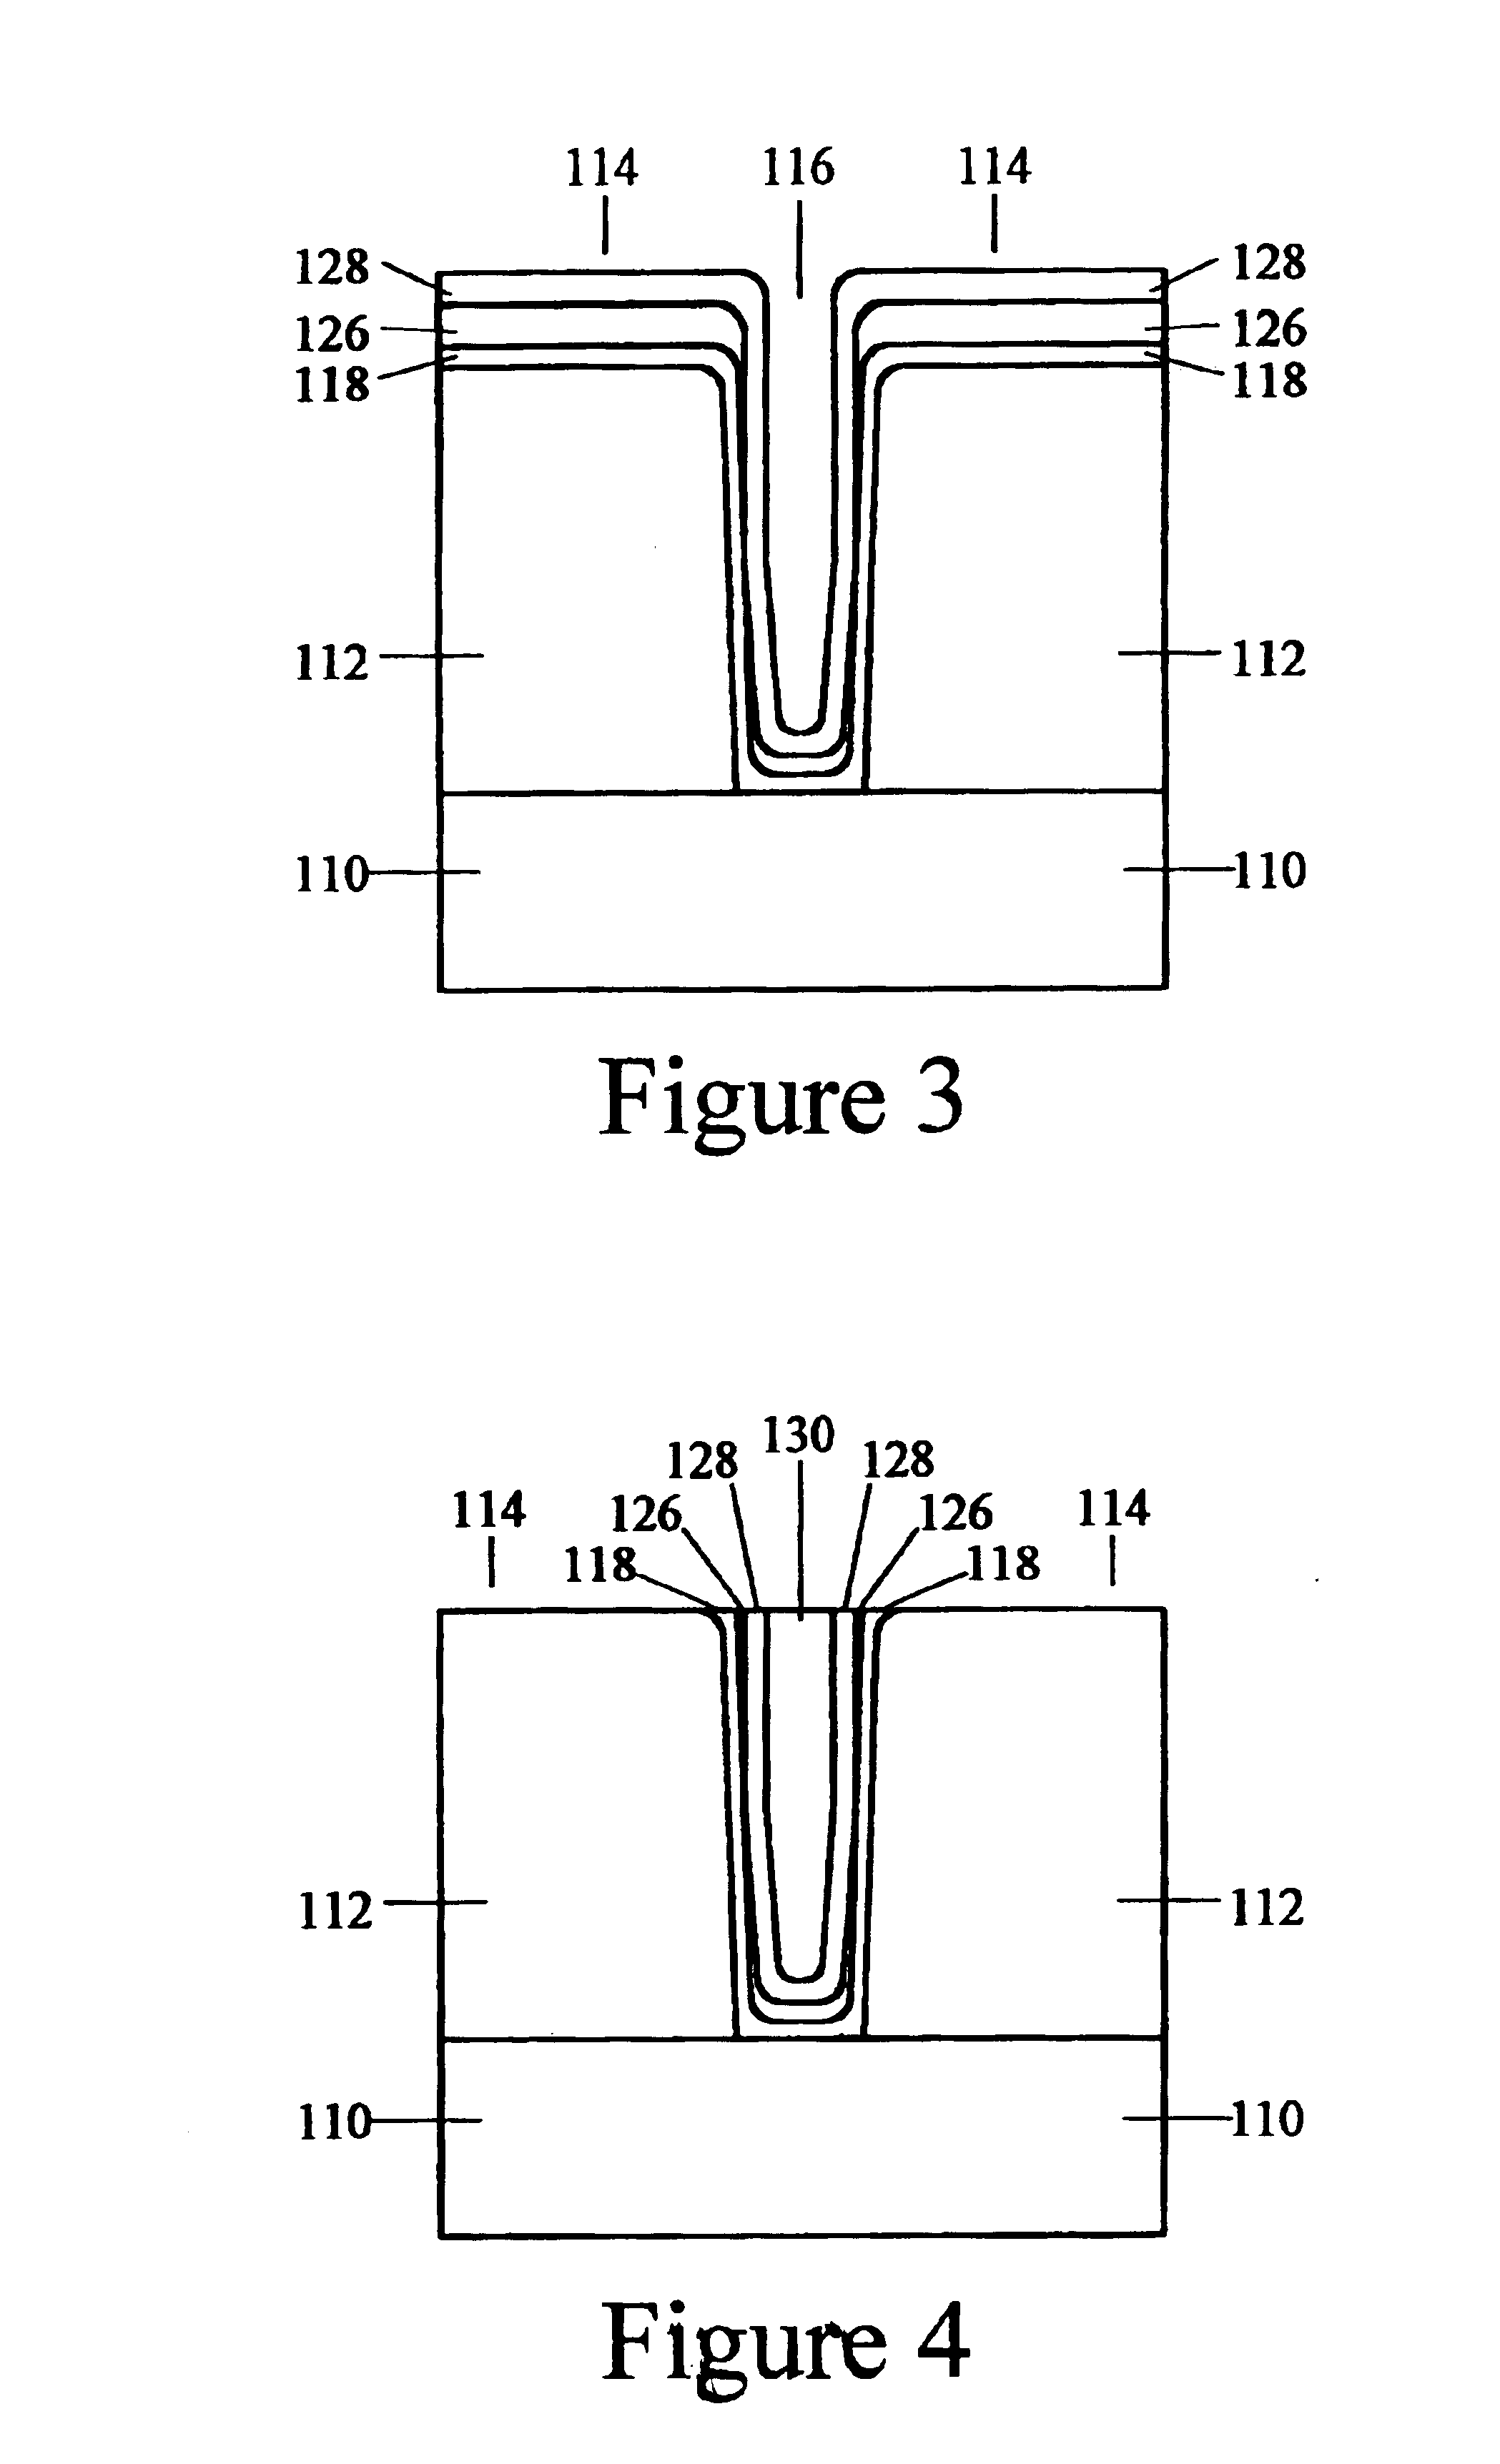 Combined conformal/non-conformal seed layers for metallic interconnects